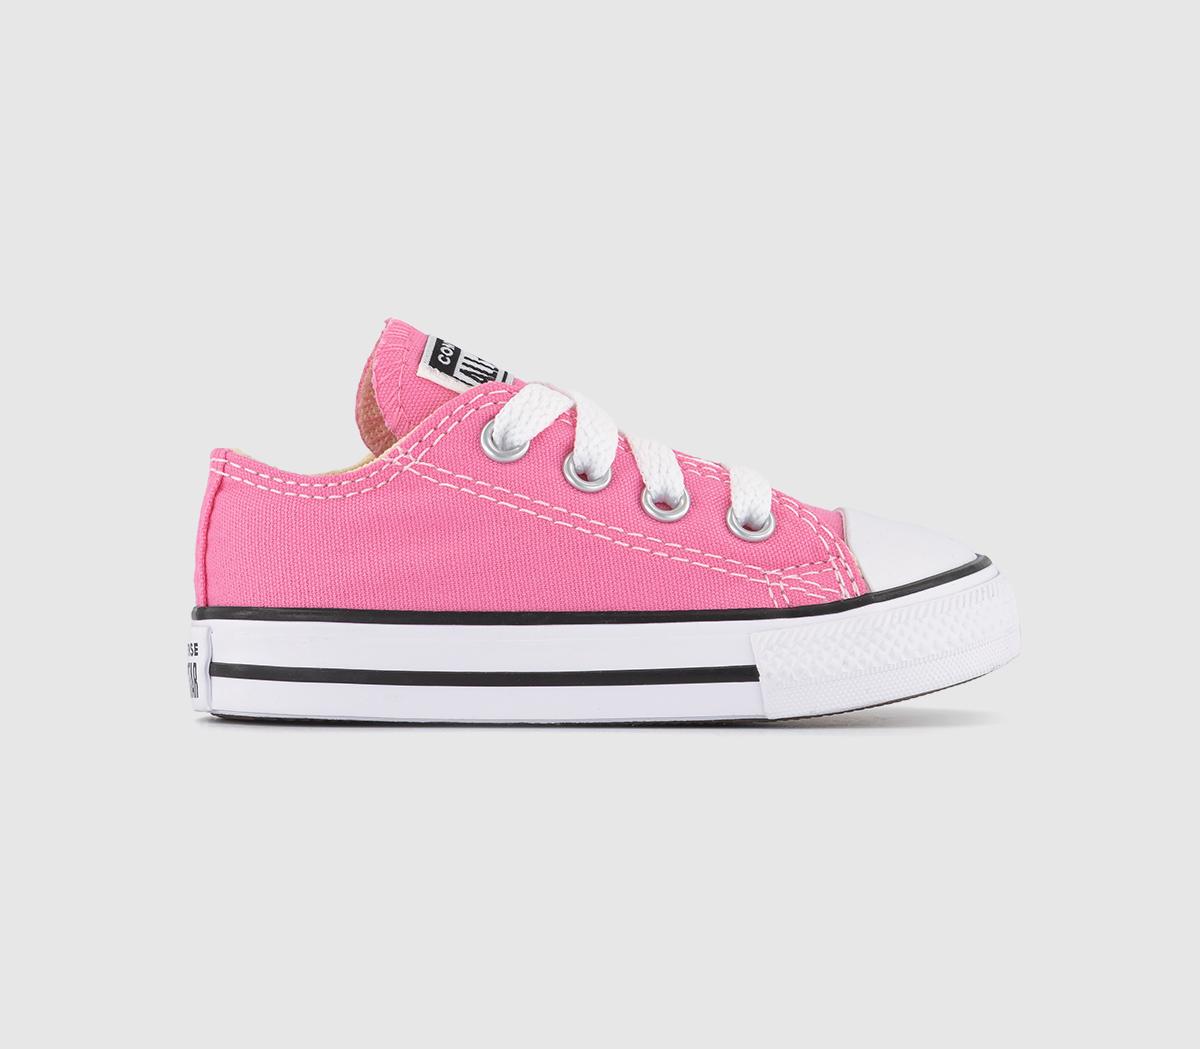 ConverseAllstar Low Infant TrainersPink Canvas